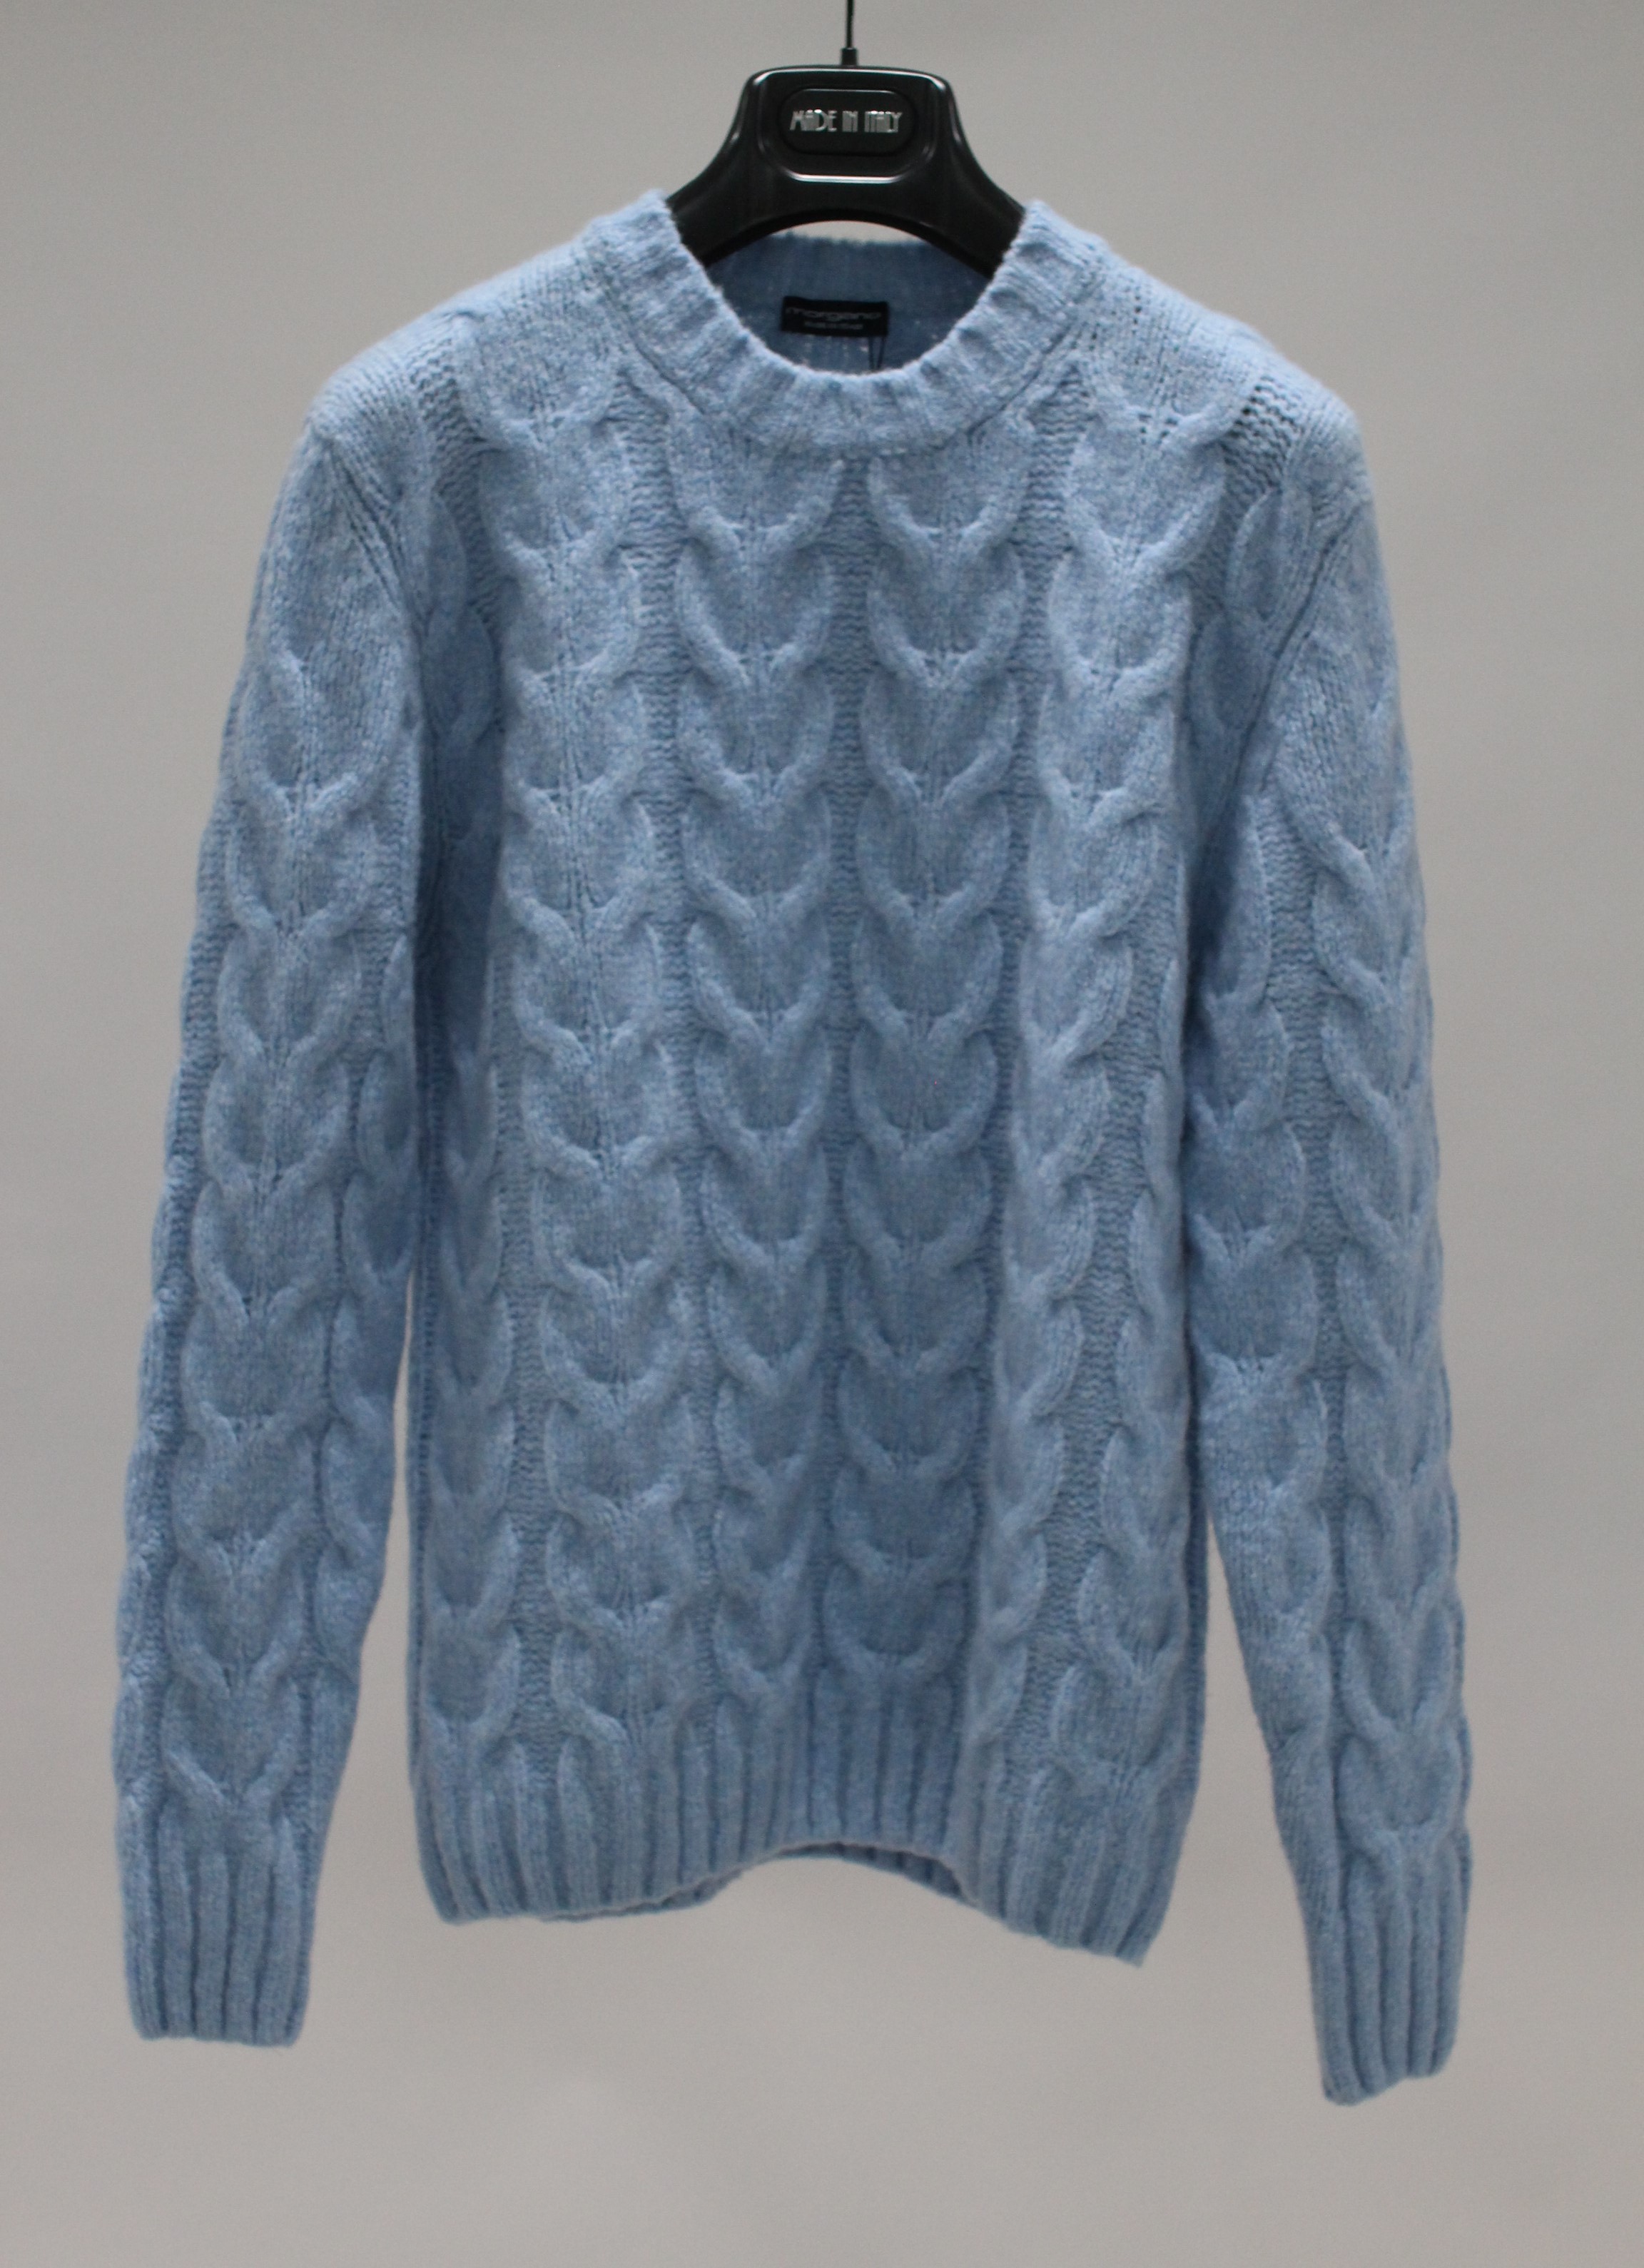 WOOL/CASH blended cable sweater SkyblueMorgano(모르가노)